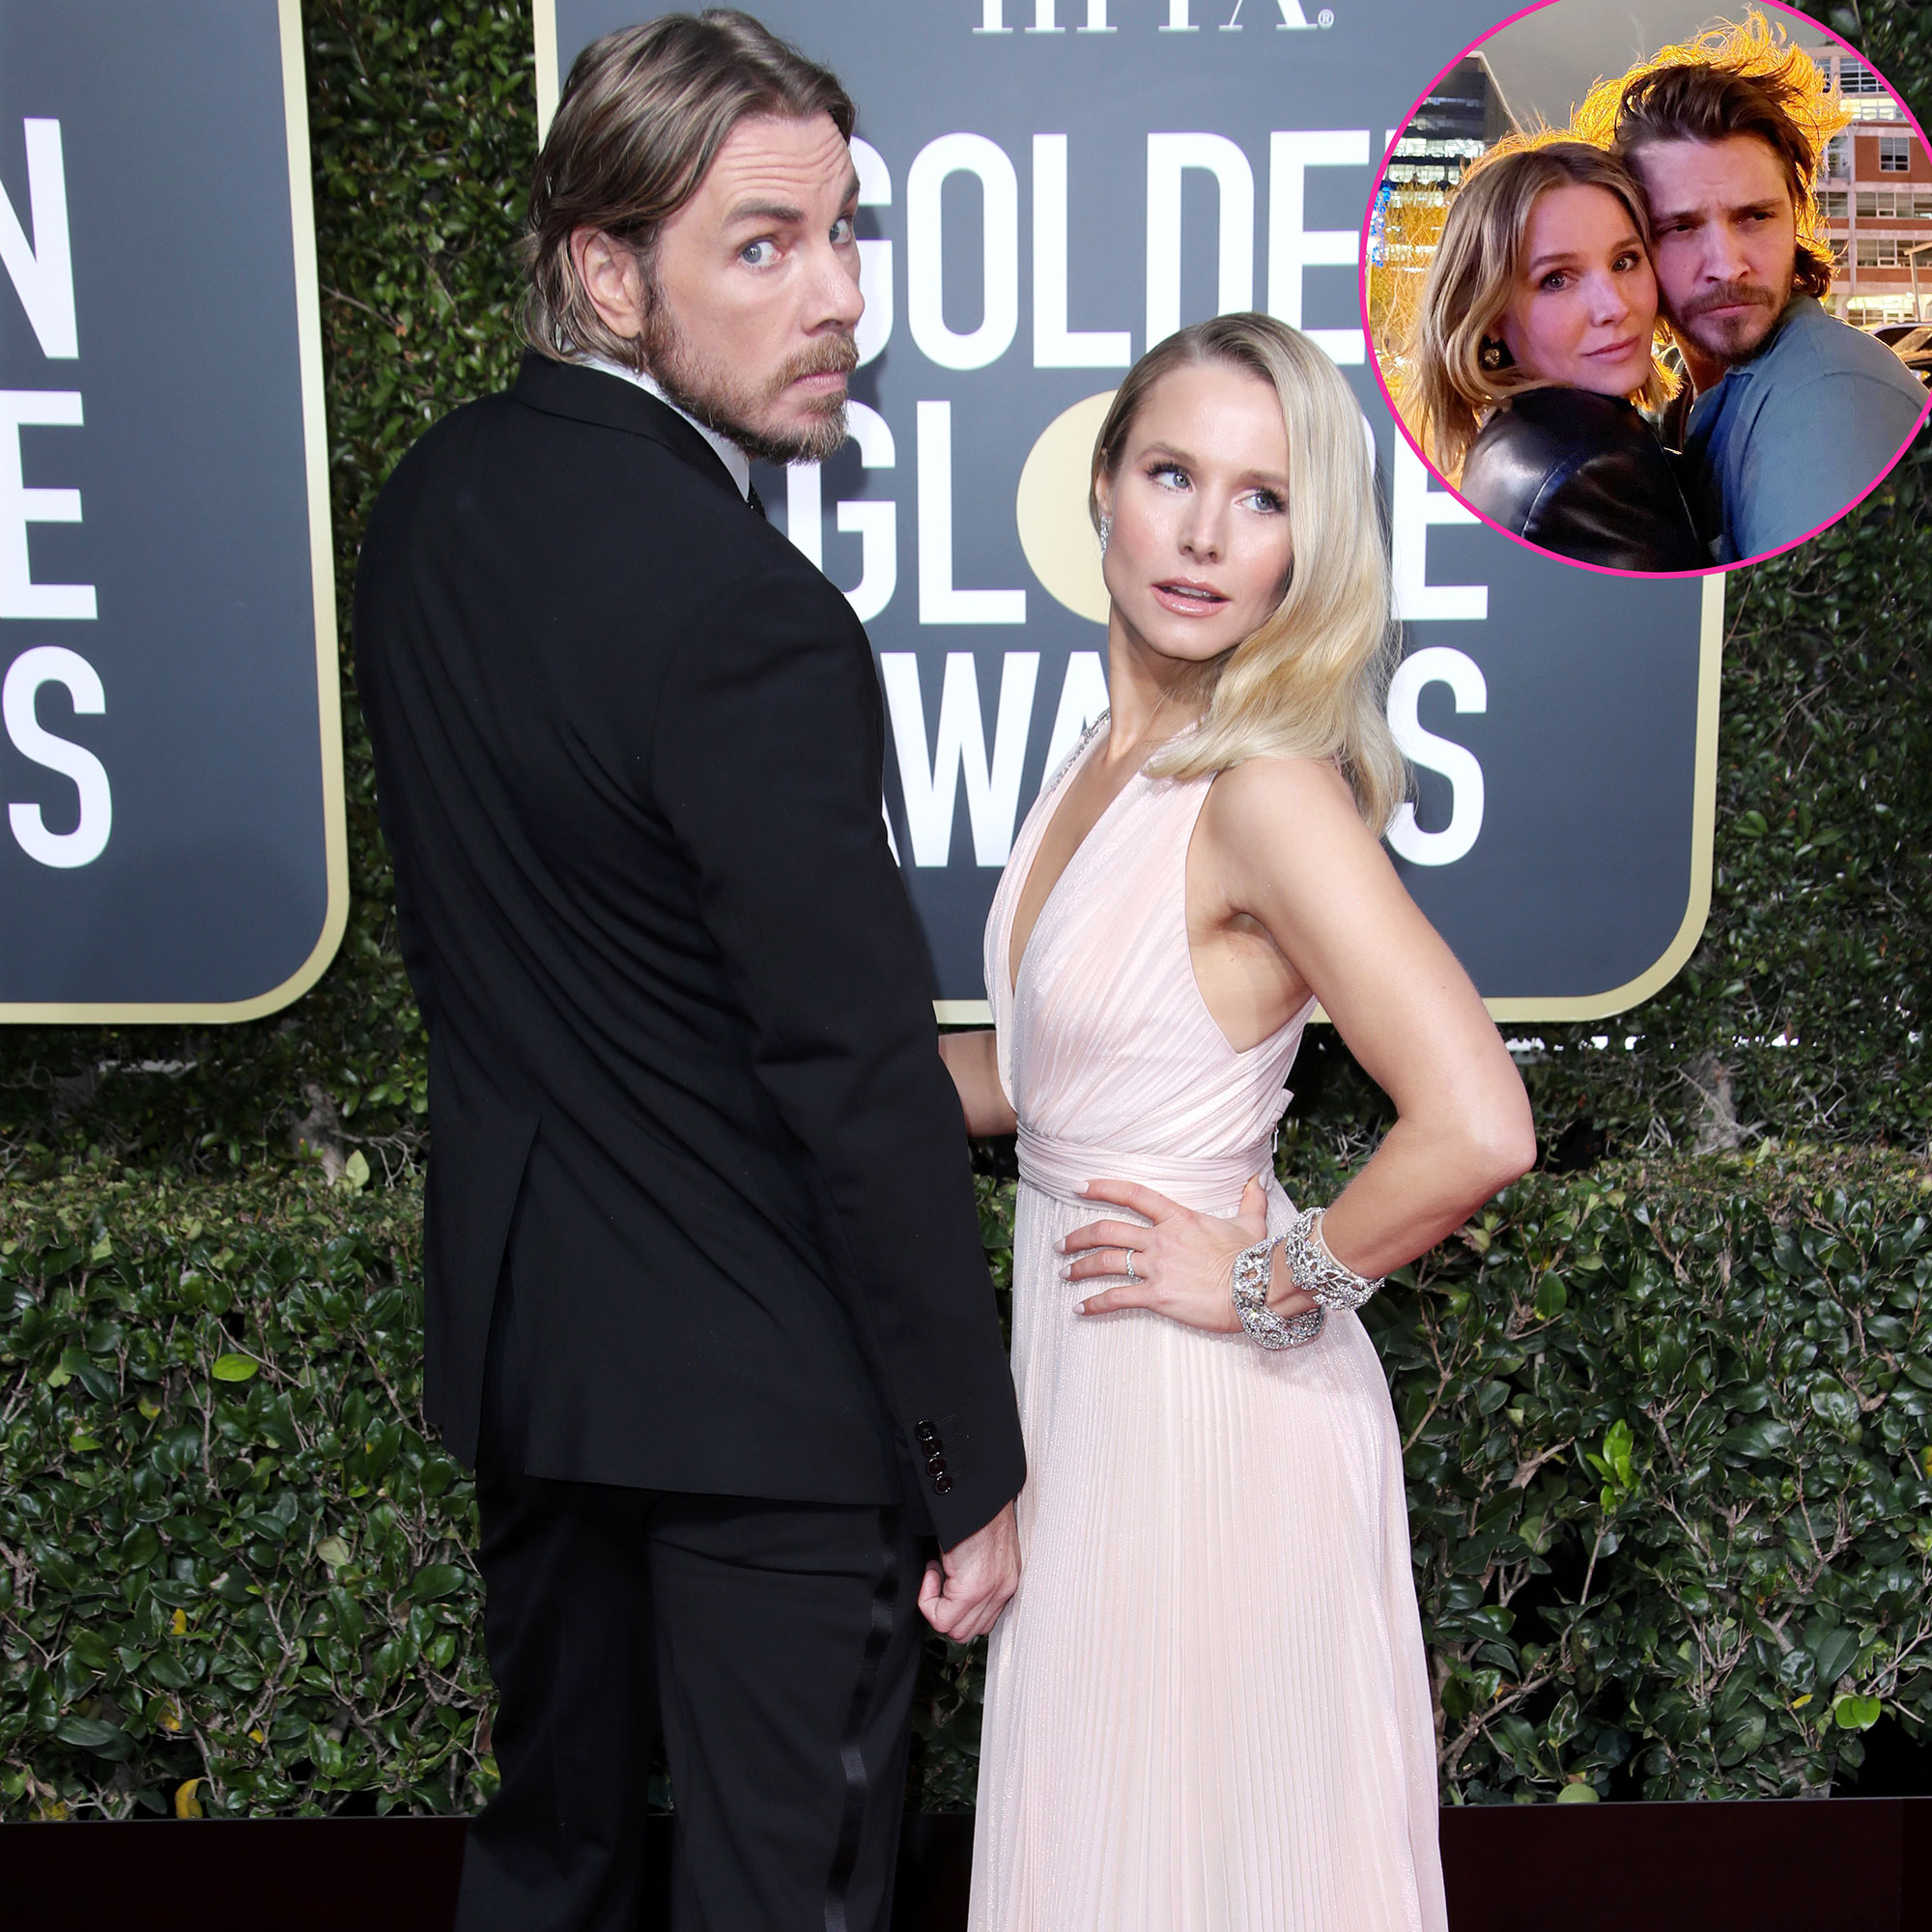 Yellowstone Star Has Dax Shepard, Kristen Bell Joking About Divorce pic picture image